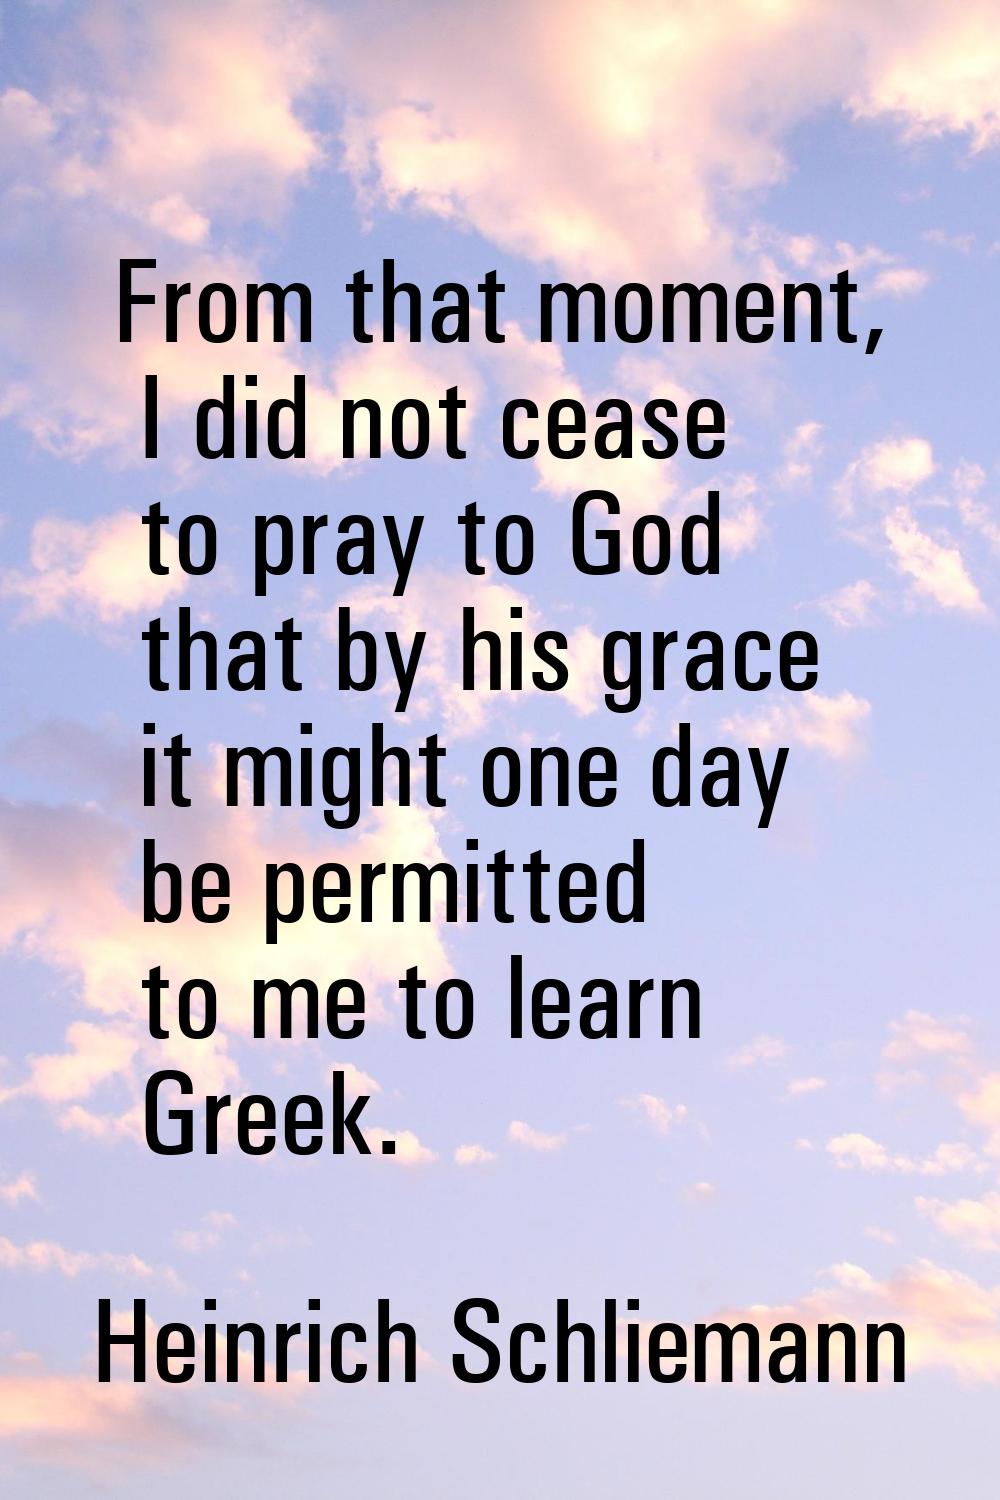 From that moment, I did not cease to pray to God that by his grace it might one day be permitted to